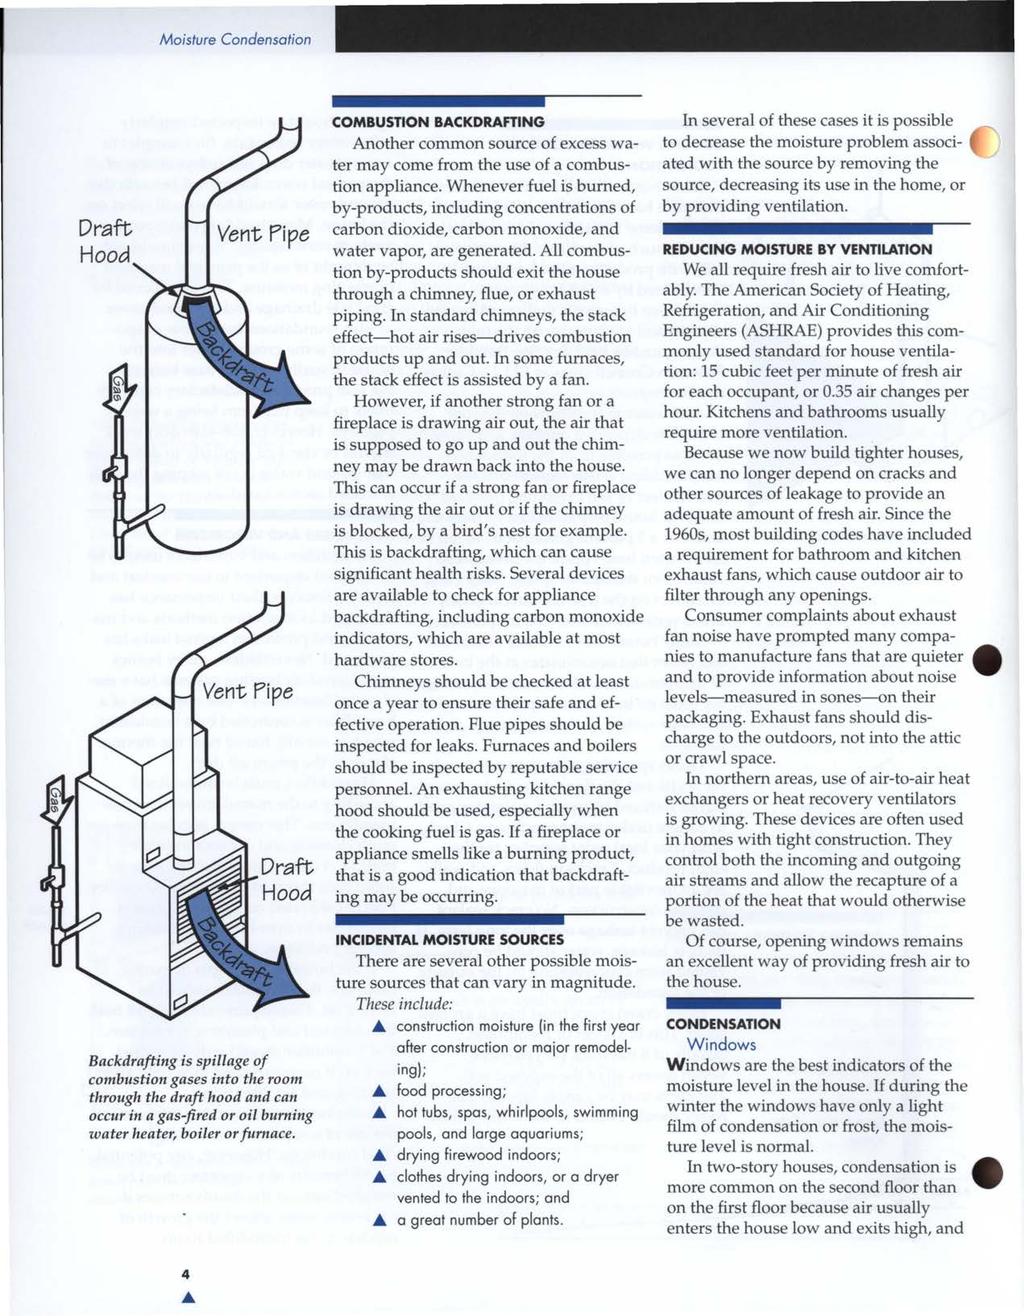 Moisture Condensation Backdrafting is spillage of combustion gases into the room through the draft hood and can occur in a gas-fired or oil burning water heater, boiler or furnace.